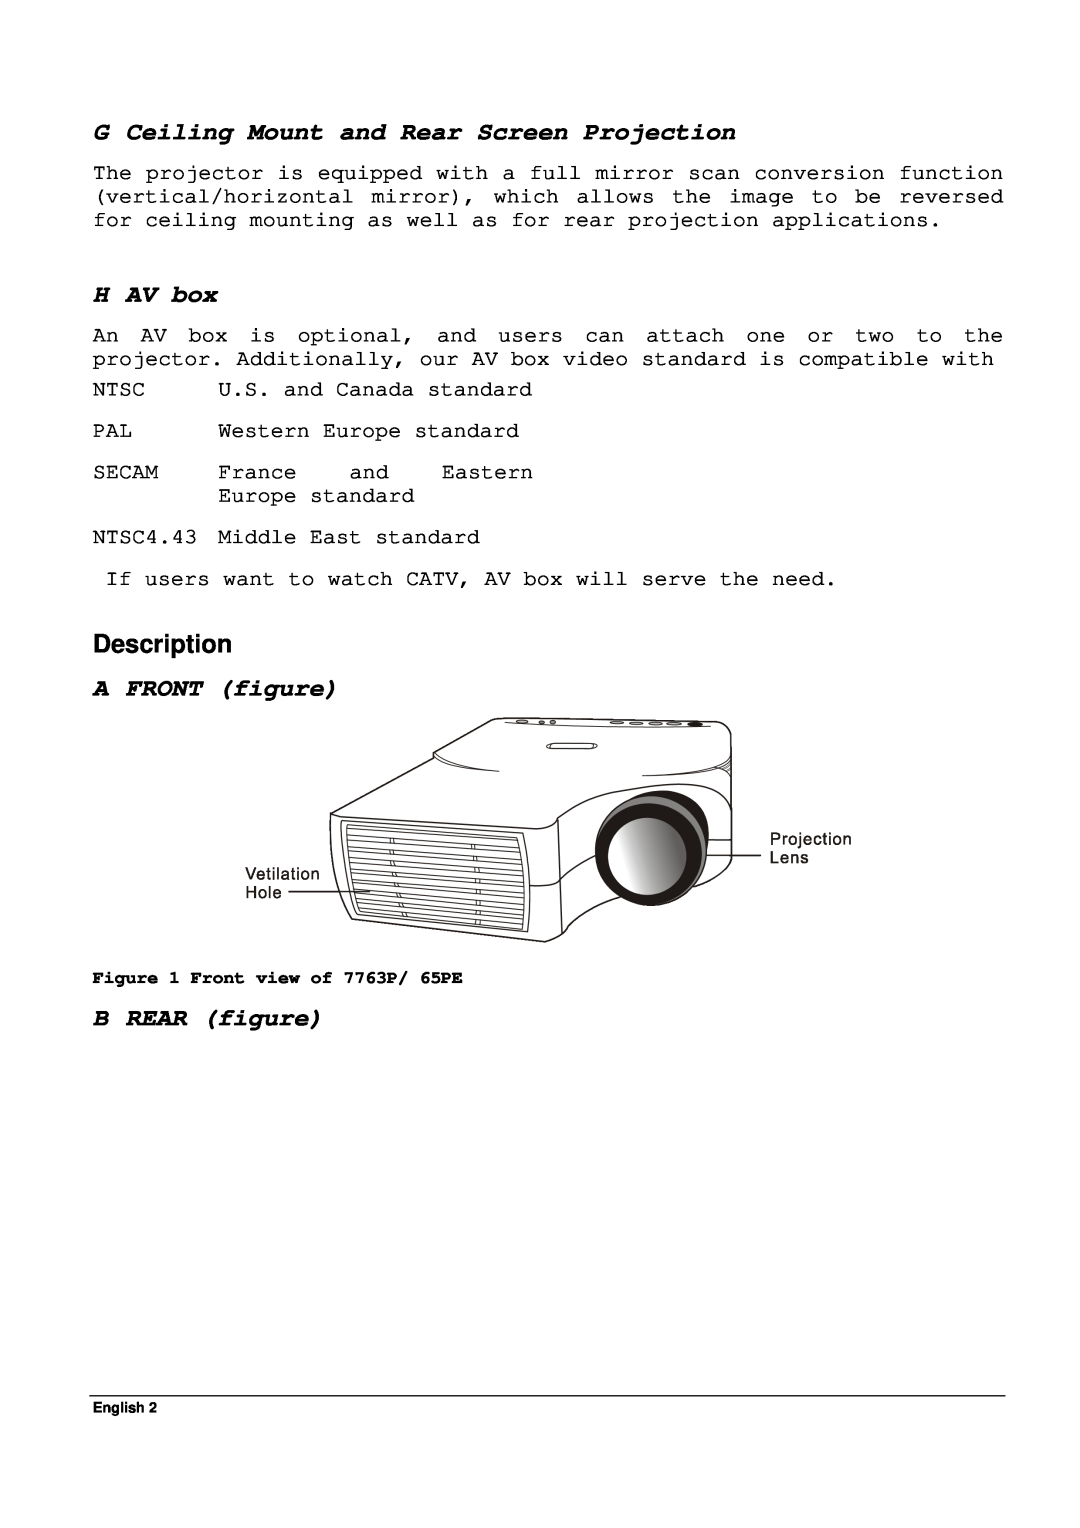 Acer 65PE specifications G Ceiling Mount and Rear Screen Projection, H AV box, Description, A FRONT figure, B REAR figure 